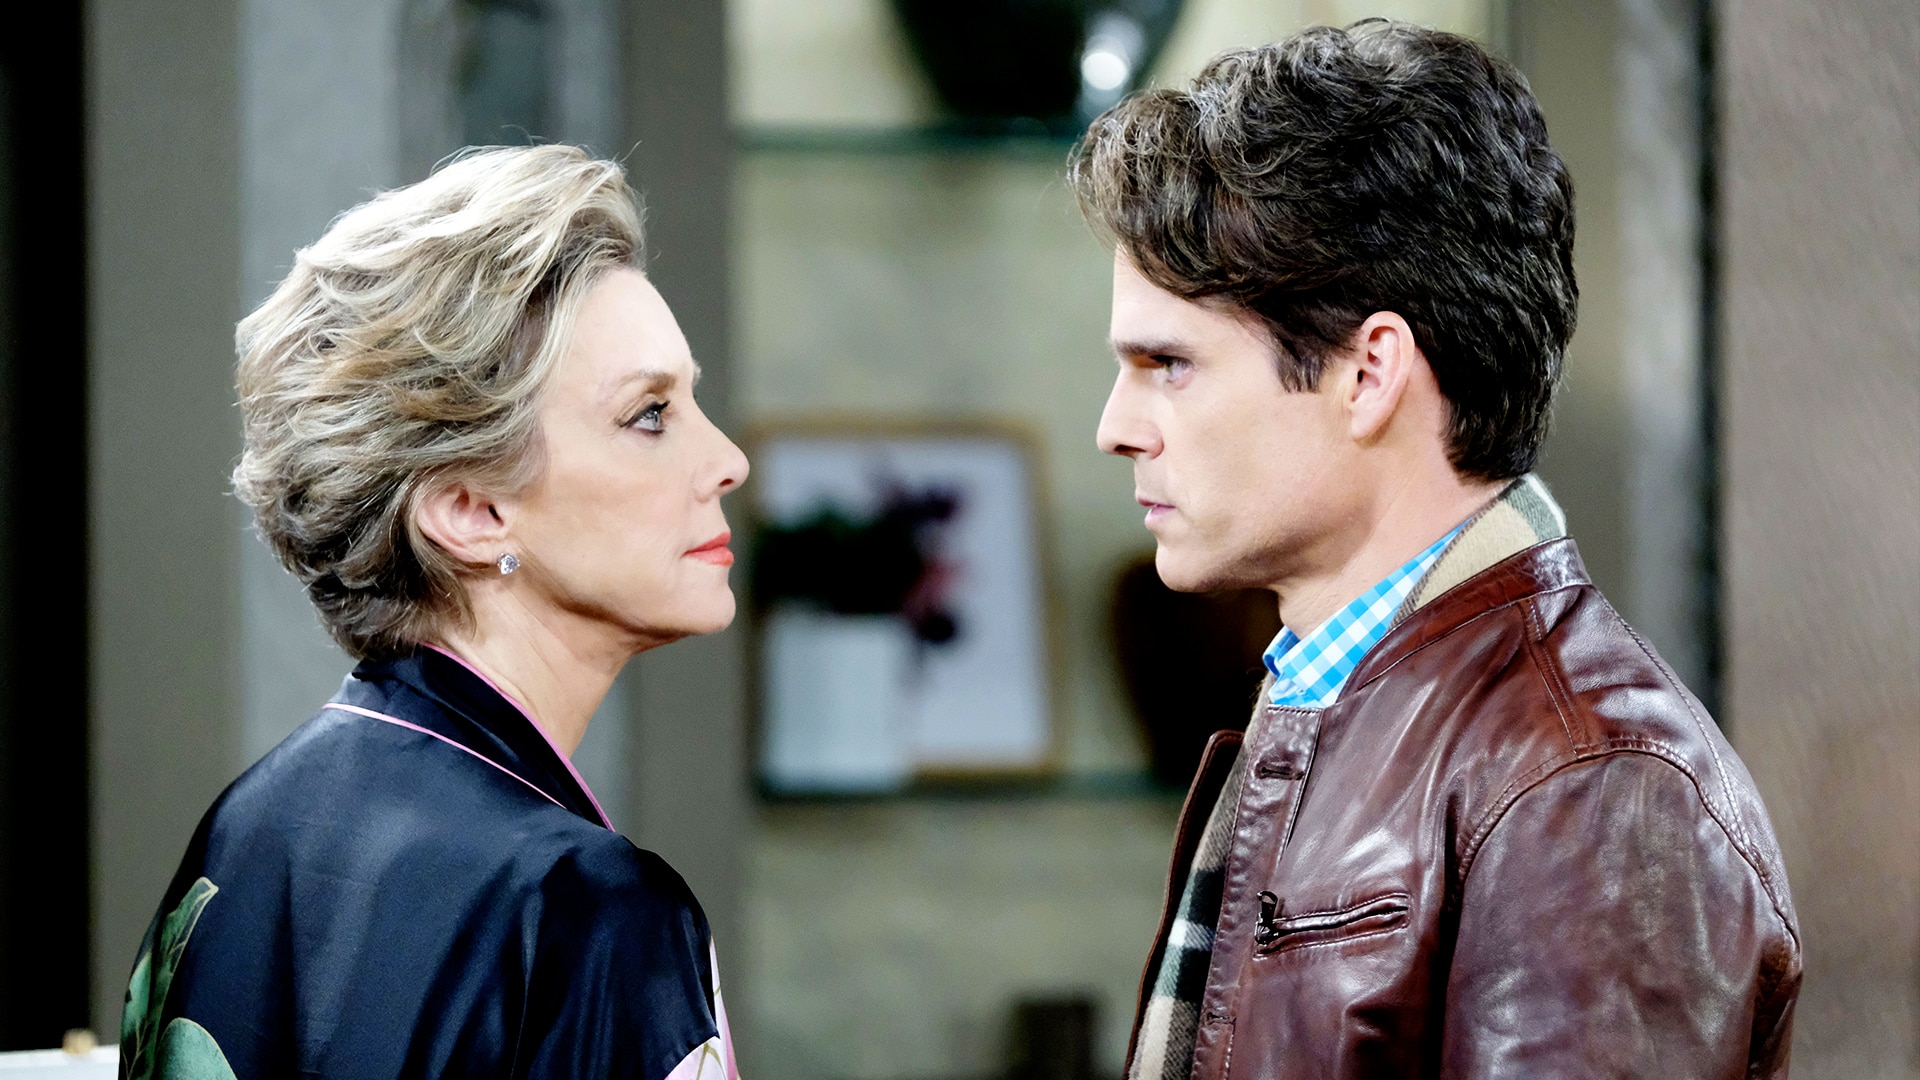 Watch Days of our Lives Episode Wednesday, February 6, 2019